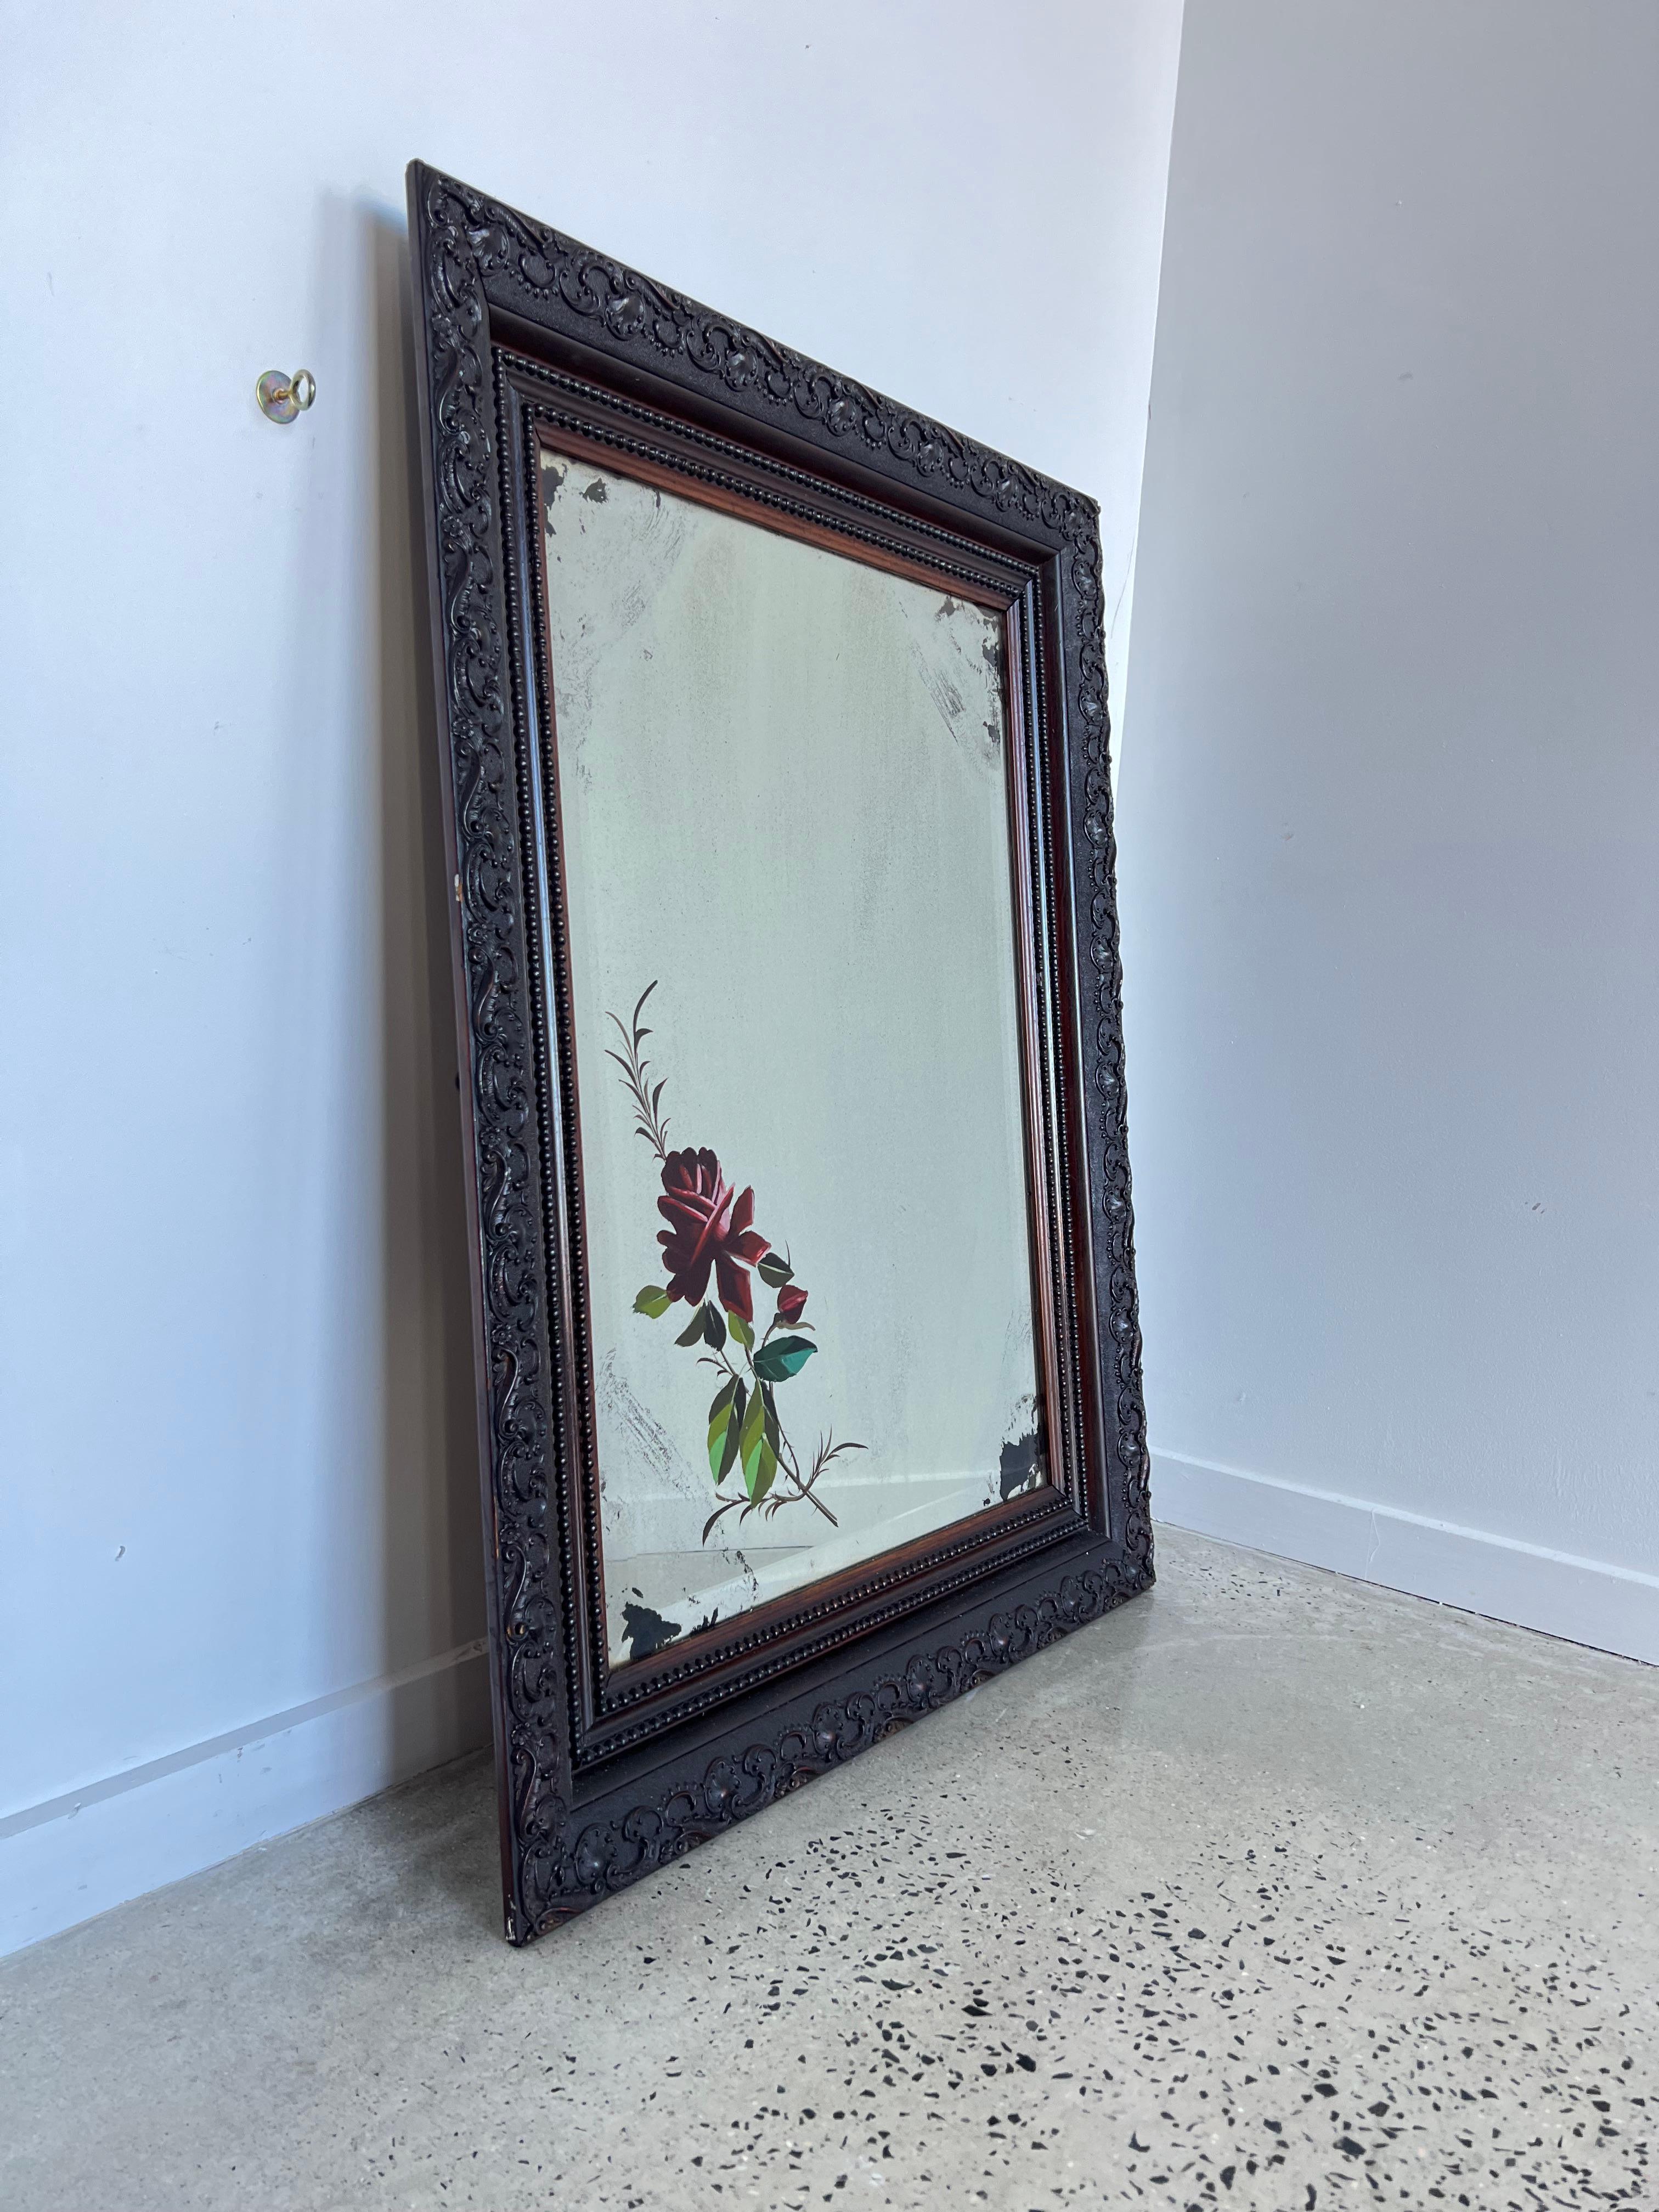 1950s Walnut carved frame Italian Art glass mirror.
Beautiful mirror with completely carved frame, hand painted flower art work on the glass.
 